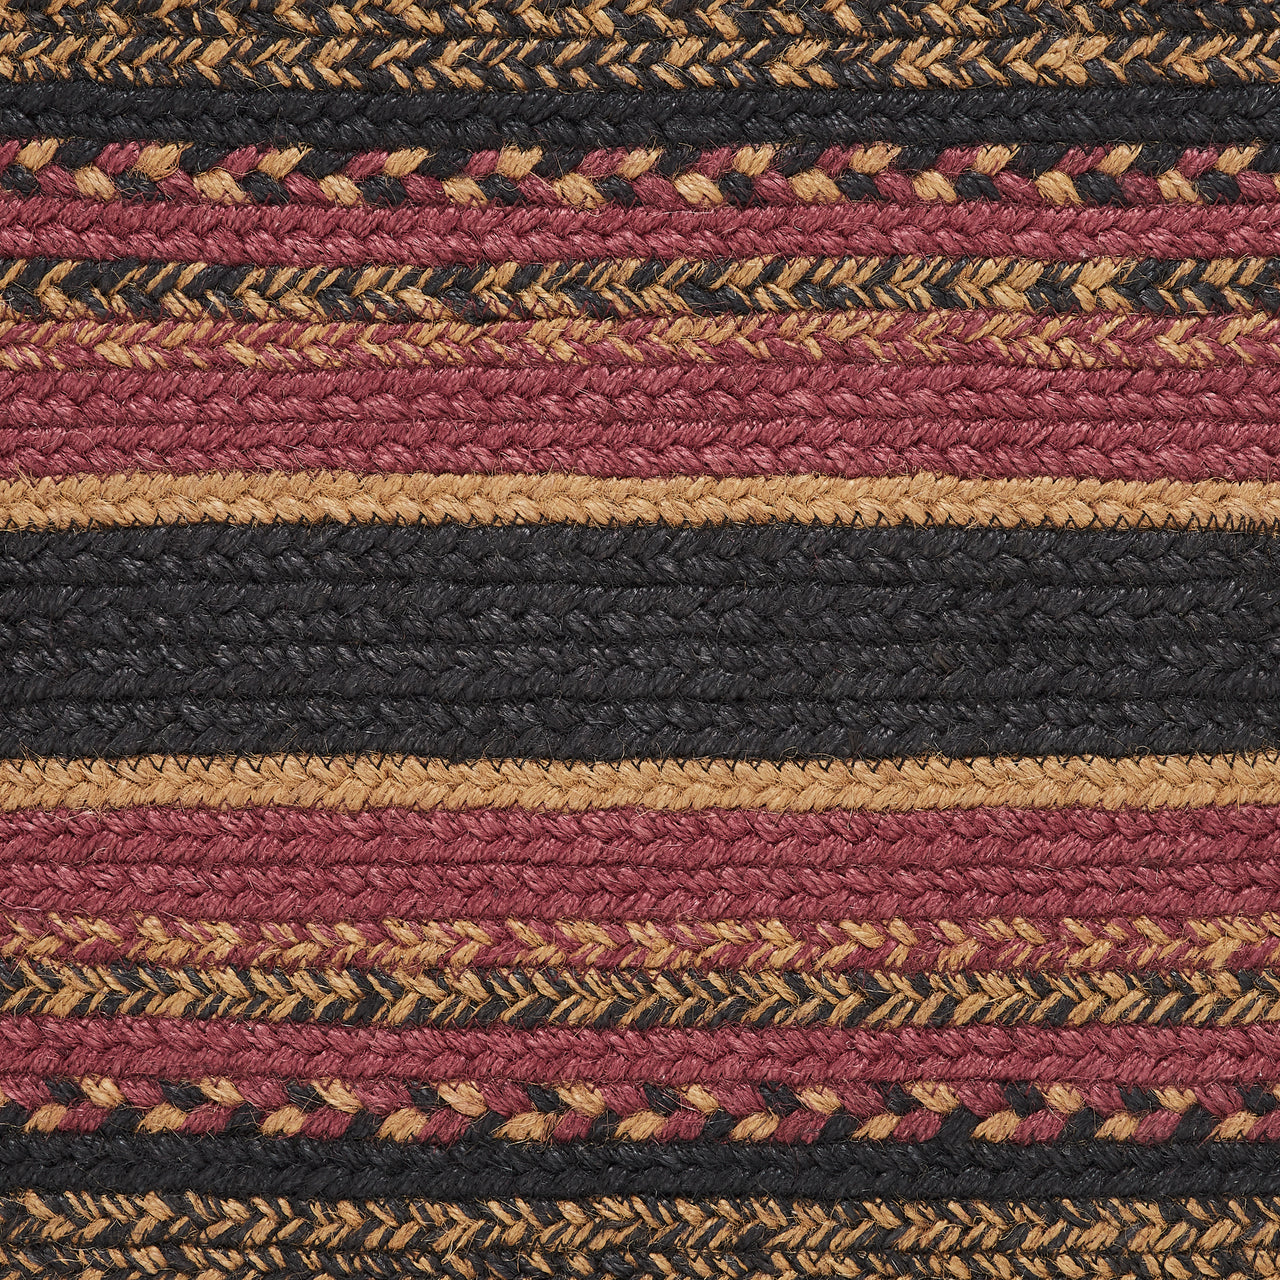 Heritage Farms Jute Braided Rug Rect. with Rug Pad 2'x3' VHC Brands